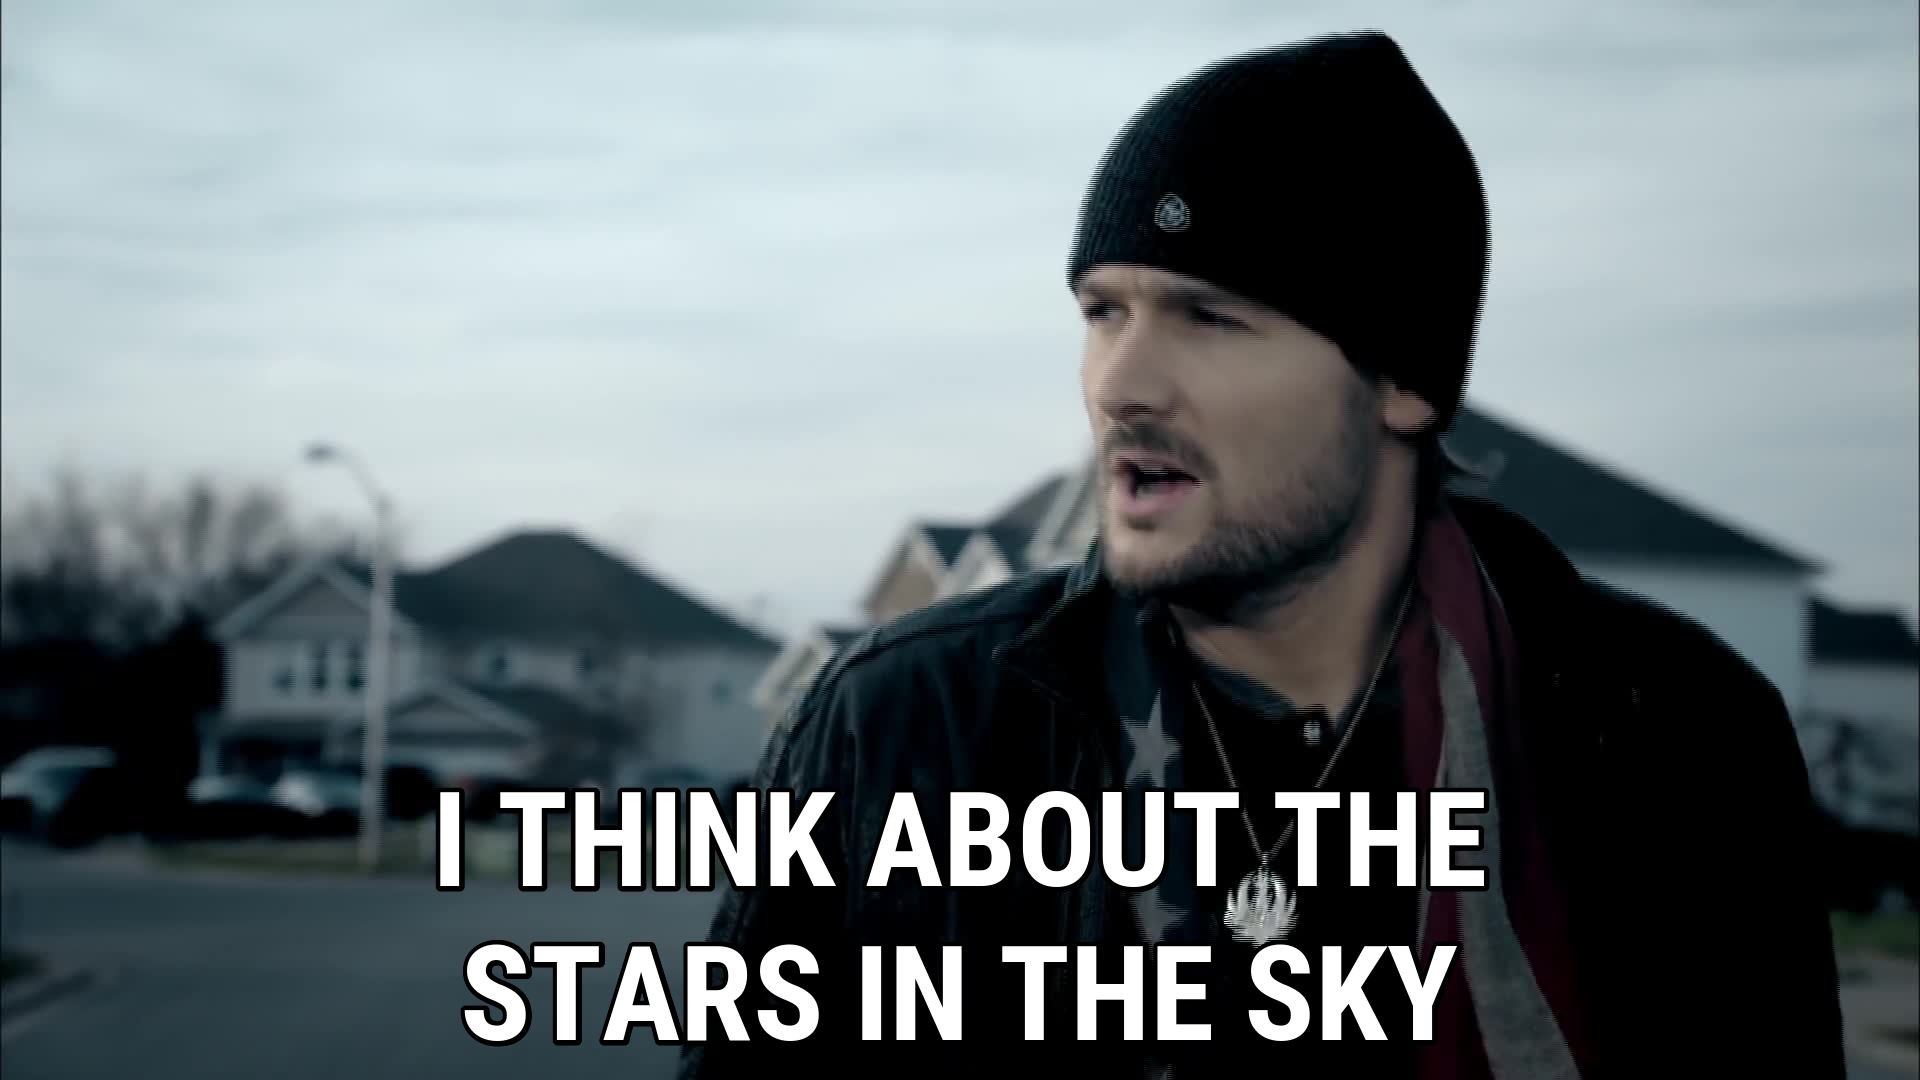 1920x1080 I think about the stars in the sky / Eric Church